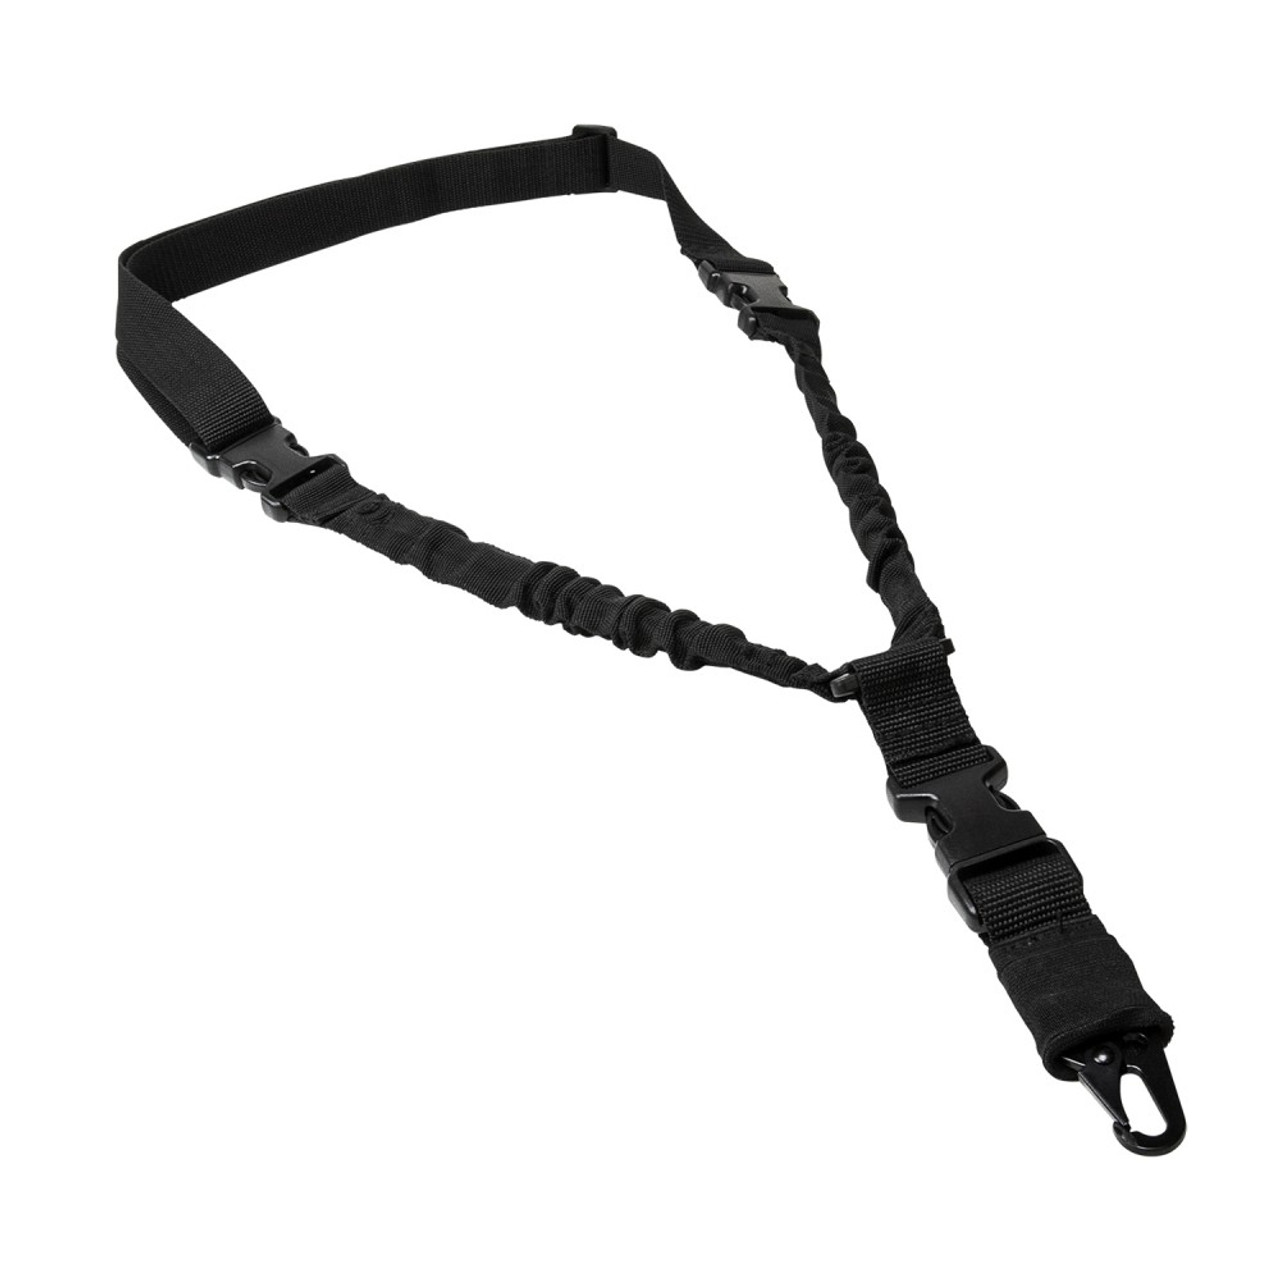 NcSTAR ADBS1PB Deluxe Single Point Sling - Black